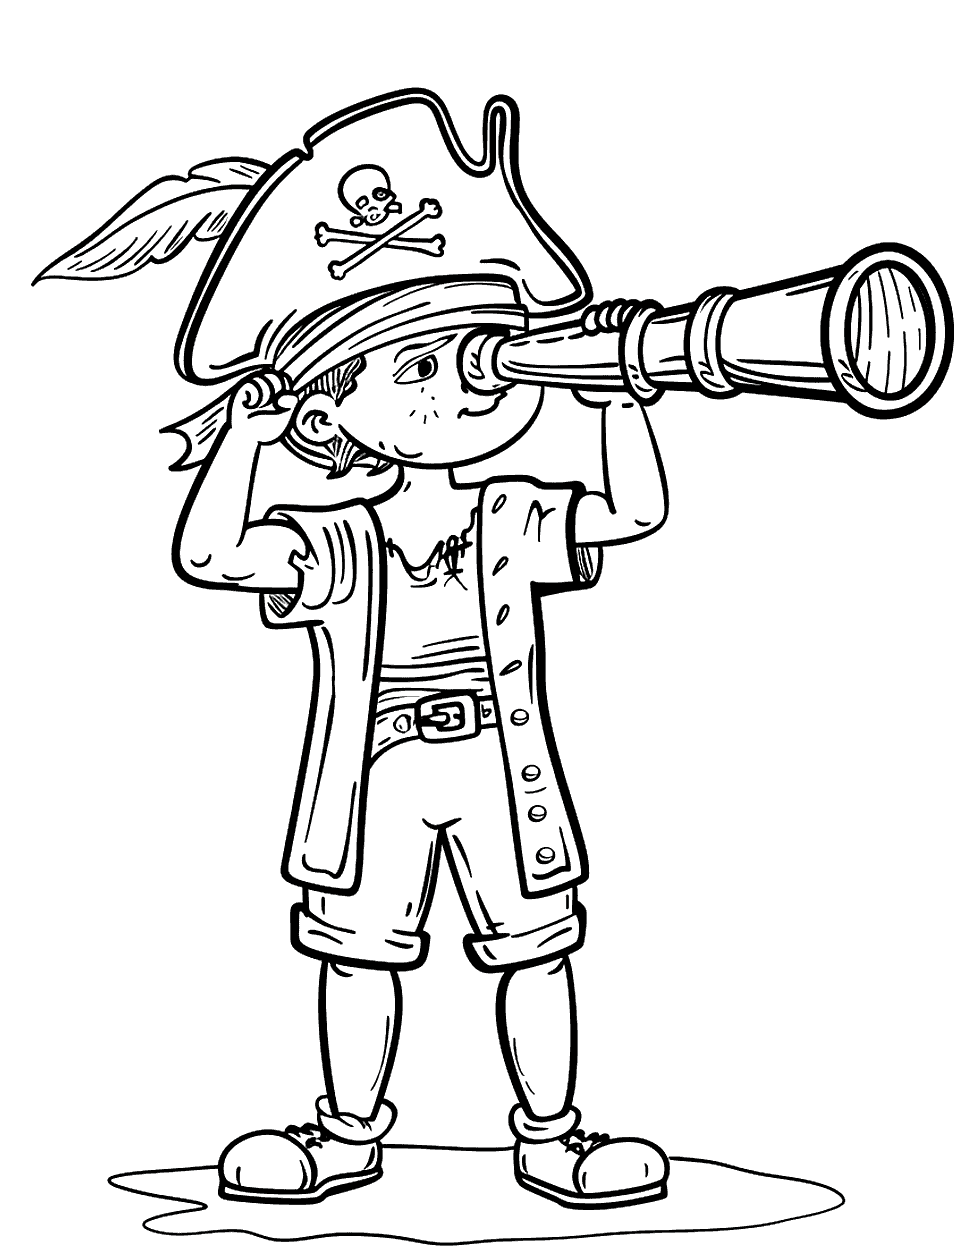 Boy Pirate and His Telescope Coloring Page - A boy pirate scanning the horizon with his telescope.